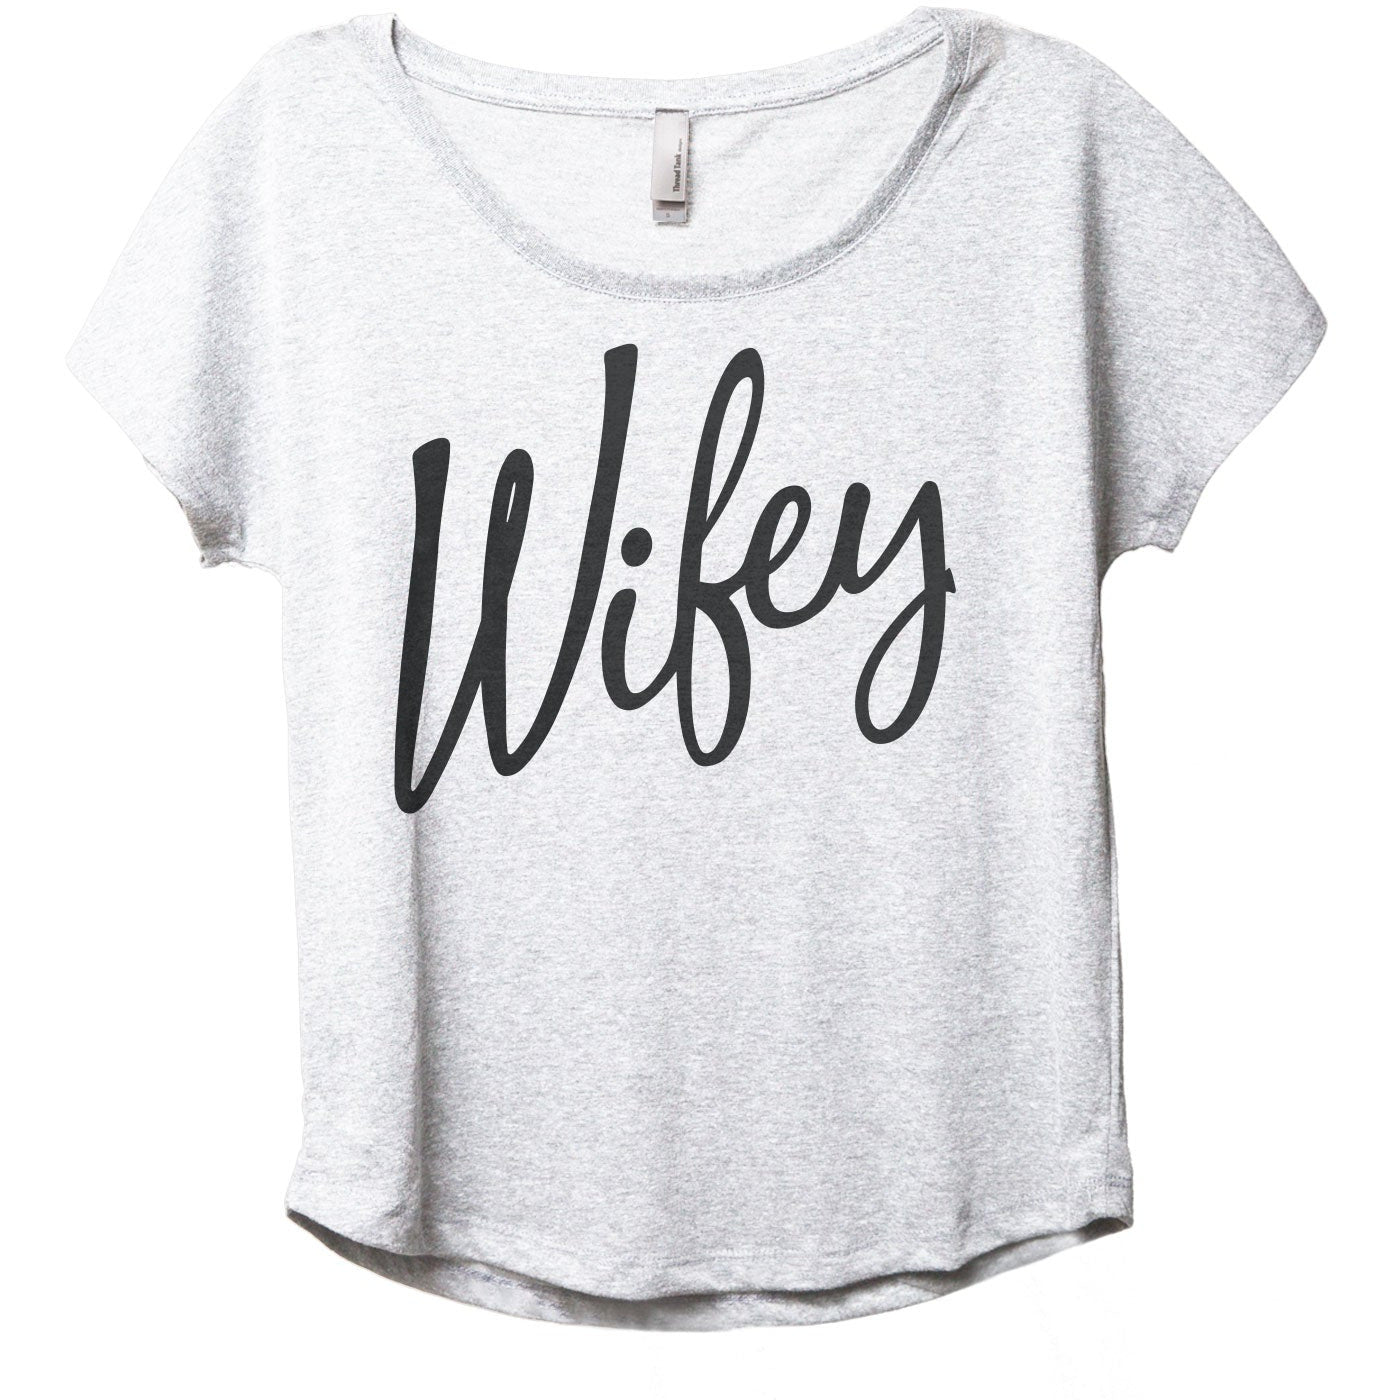 Wifey Cursive - Stories You Can Wear